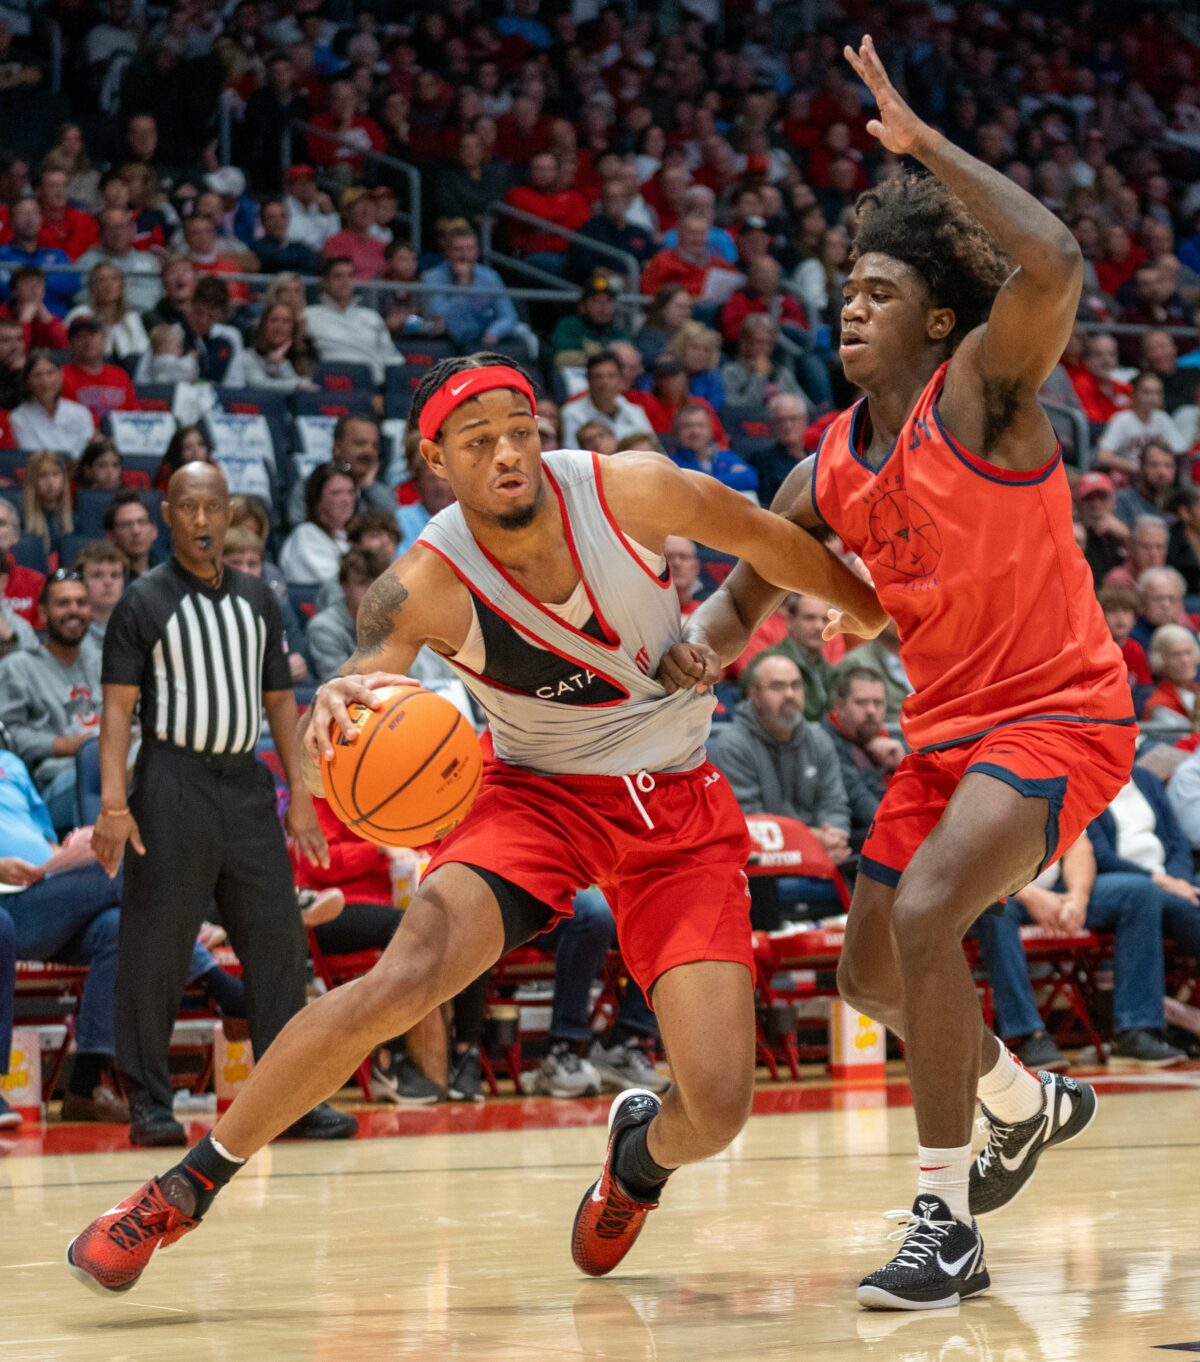 Ohio State basketball beats Dayton in charity exhibition